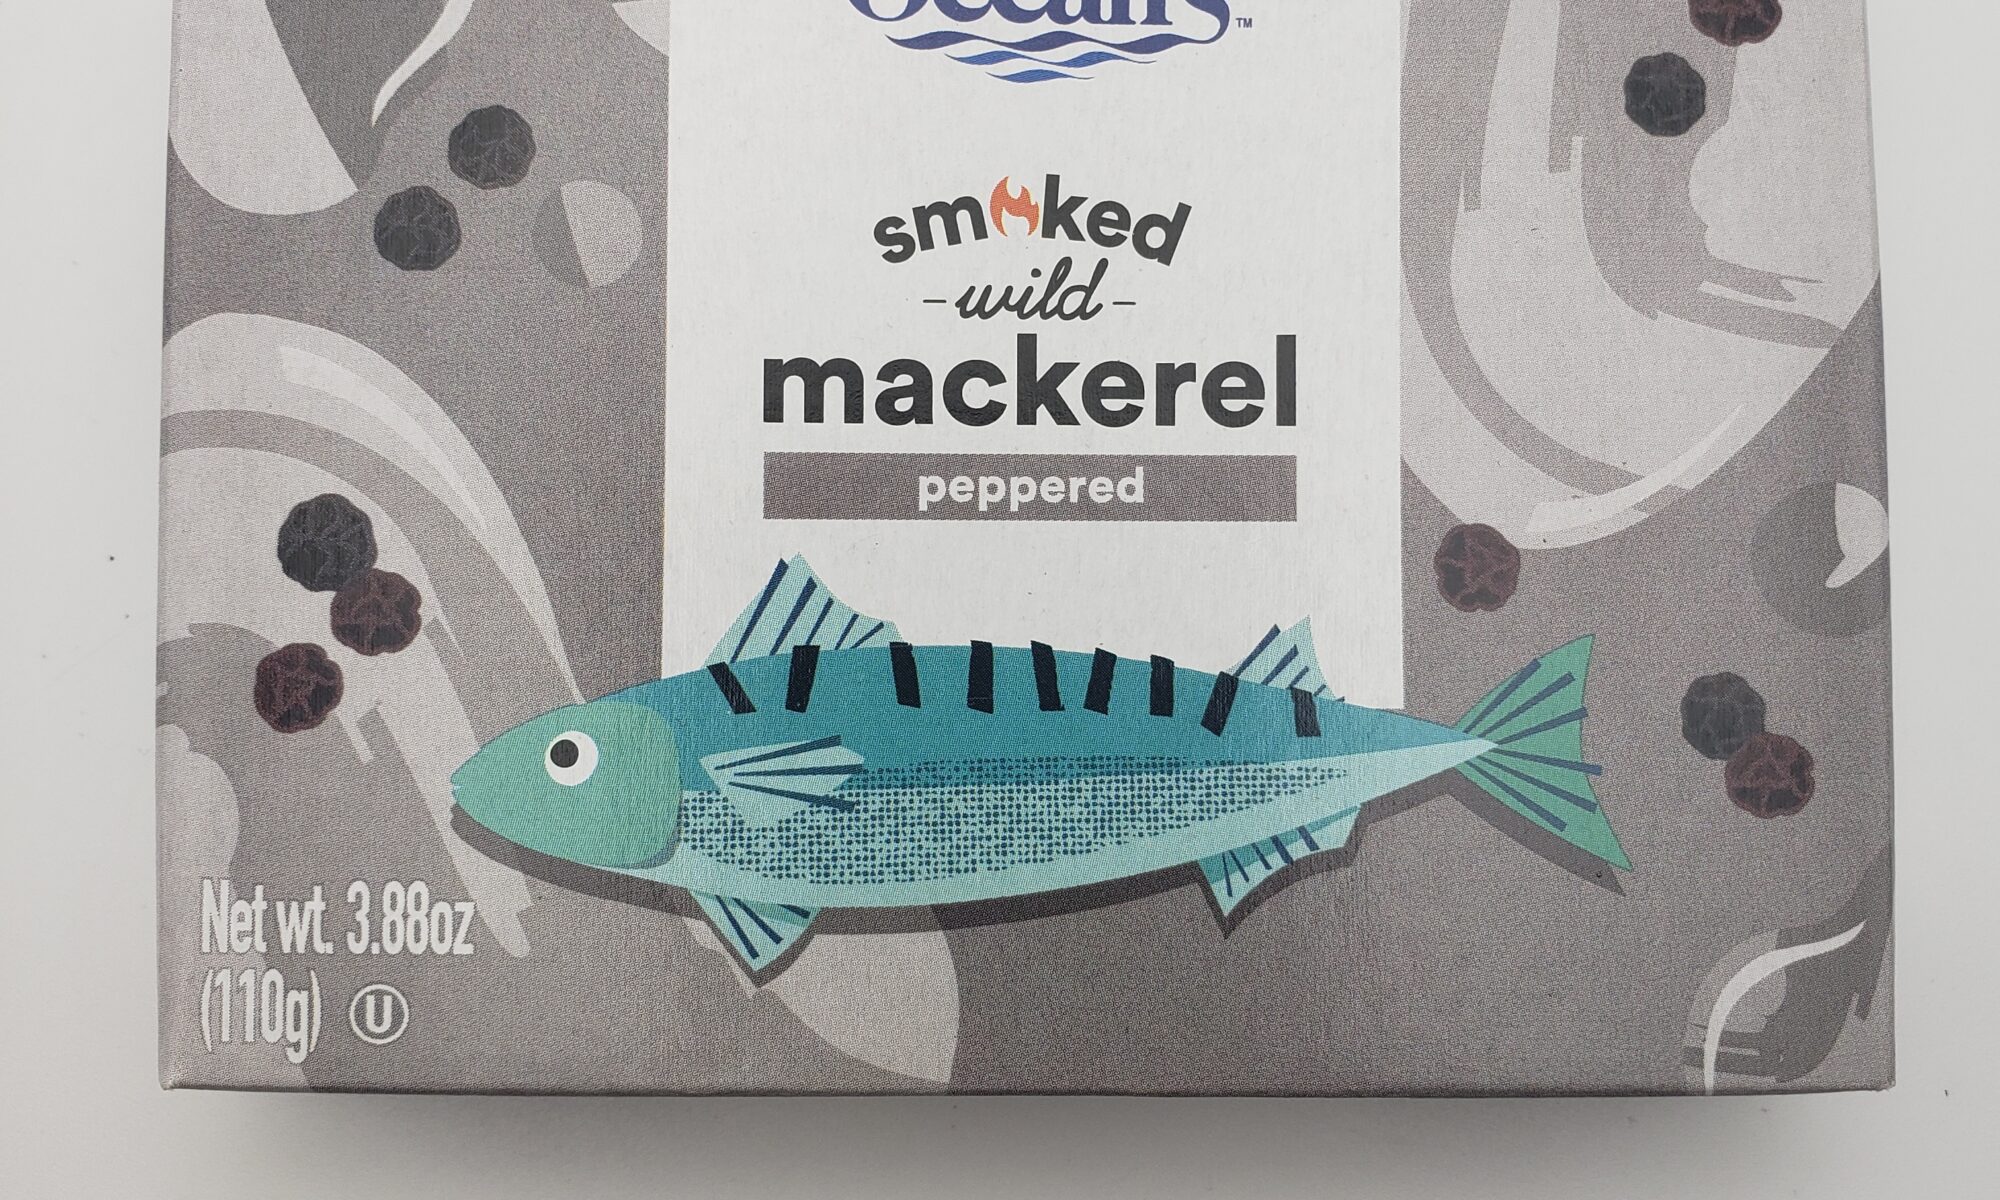 Image of the front of a package of Ocean's Smoked Peppered Mackerel